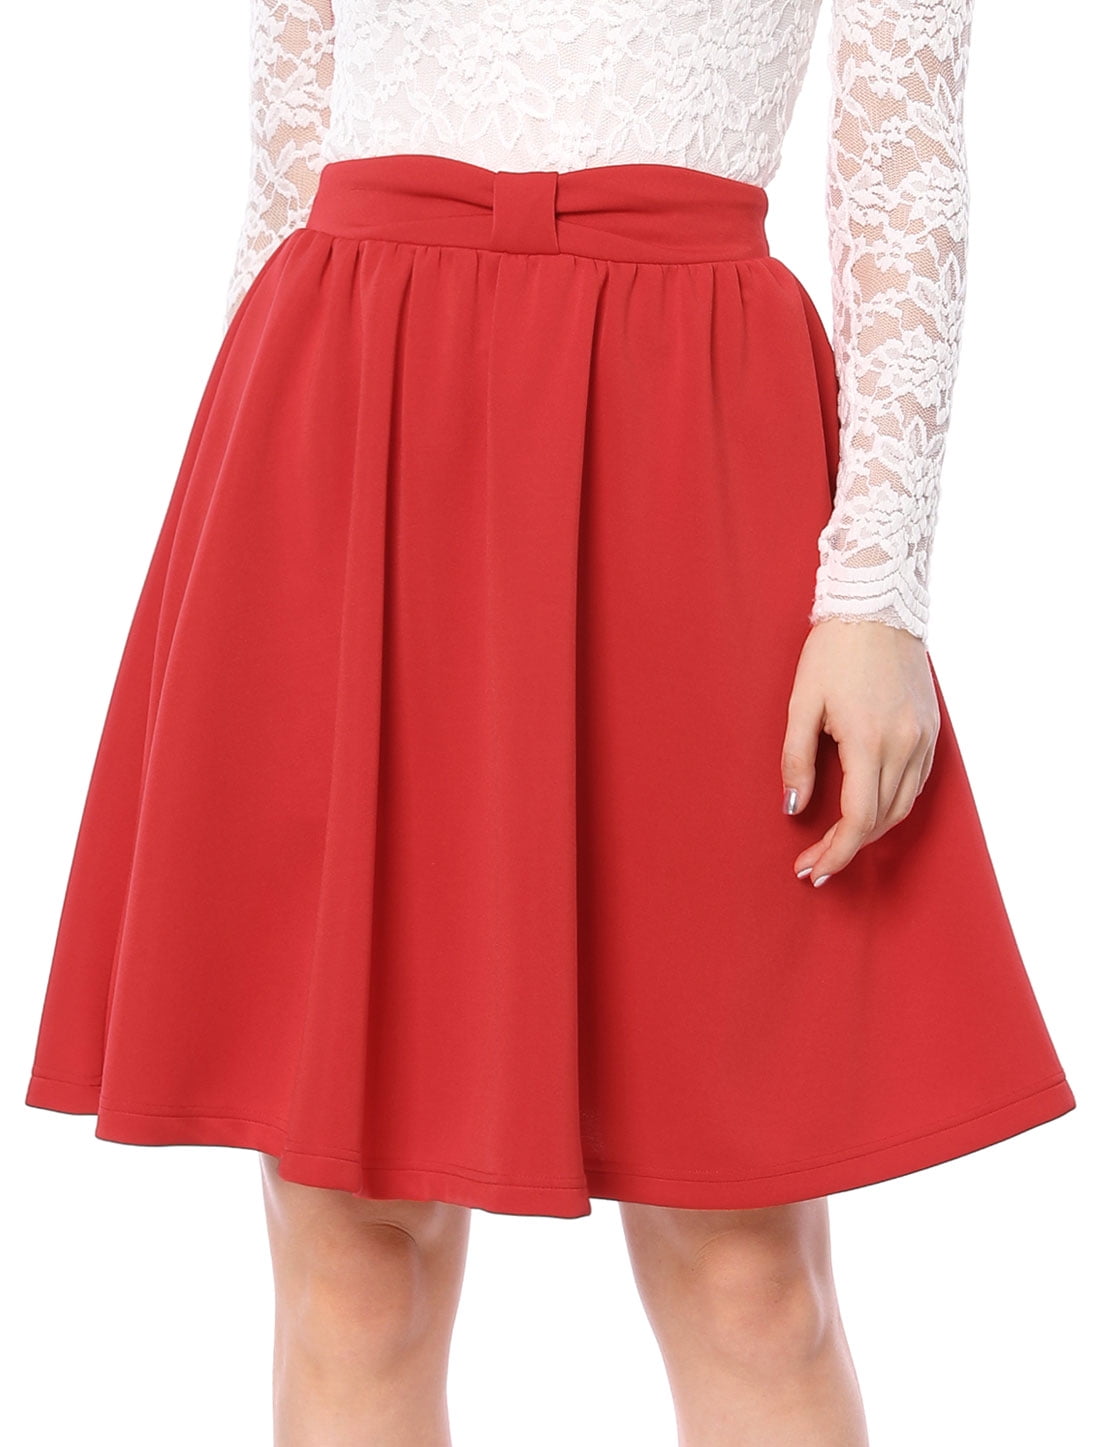 Unique Bargains Women's Above Knee Pleated Bow Flared Skirt (Size XL / 18)